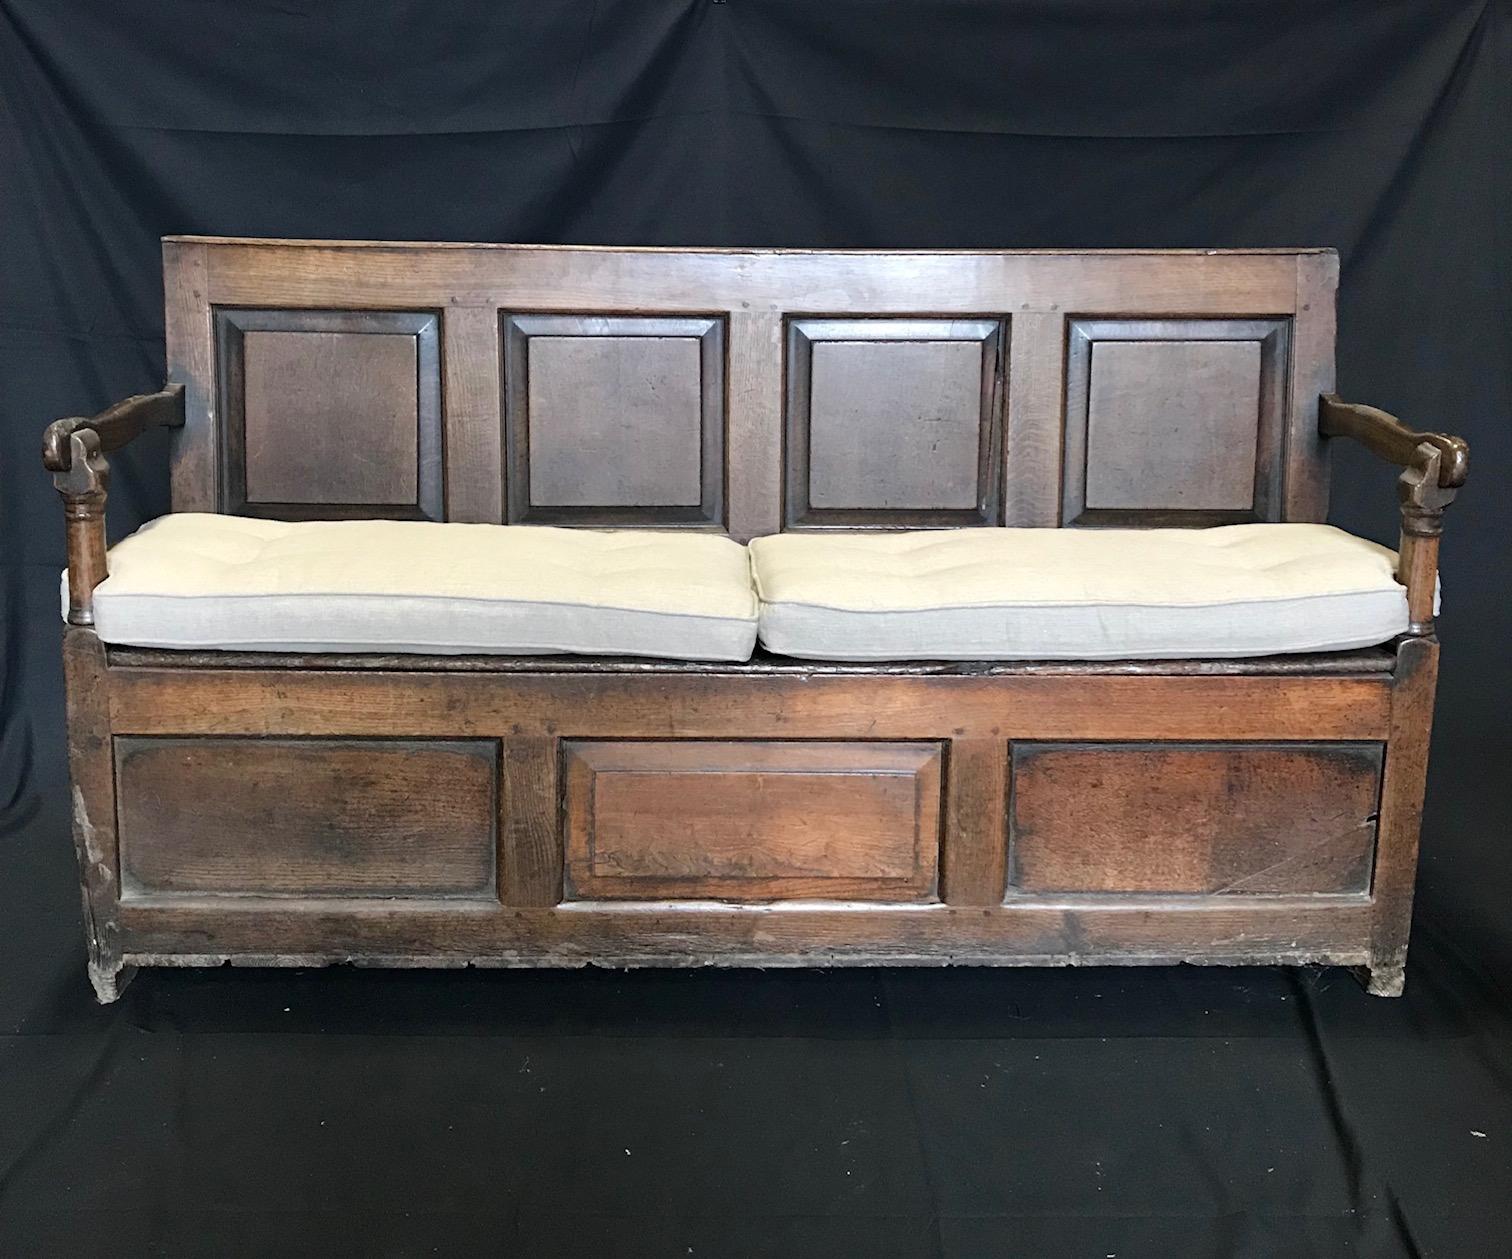 Incredible early British bench having richly carved back with panelled squares, handsome arms and a seat that lifts to reveal storage inside. Two new seat cushions are included.
Measures: Seat height 23
arm height 31
1780-1820.